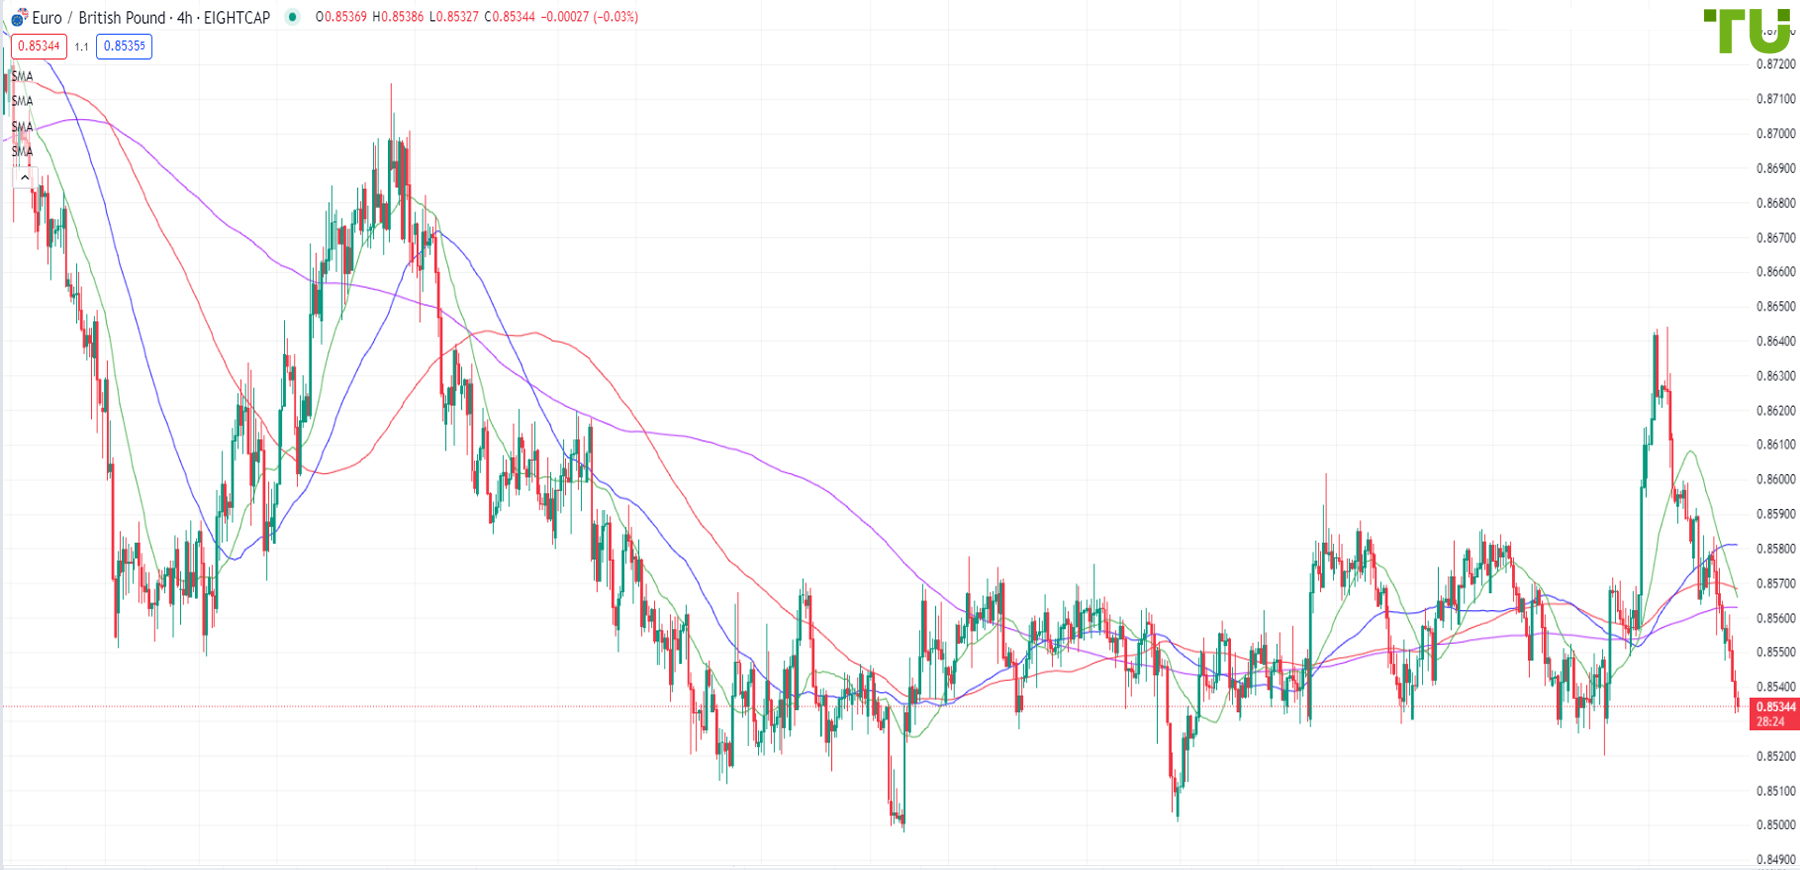 EUR/GBP tested 0.8535